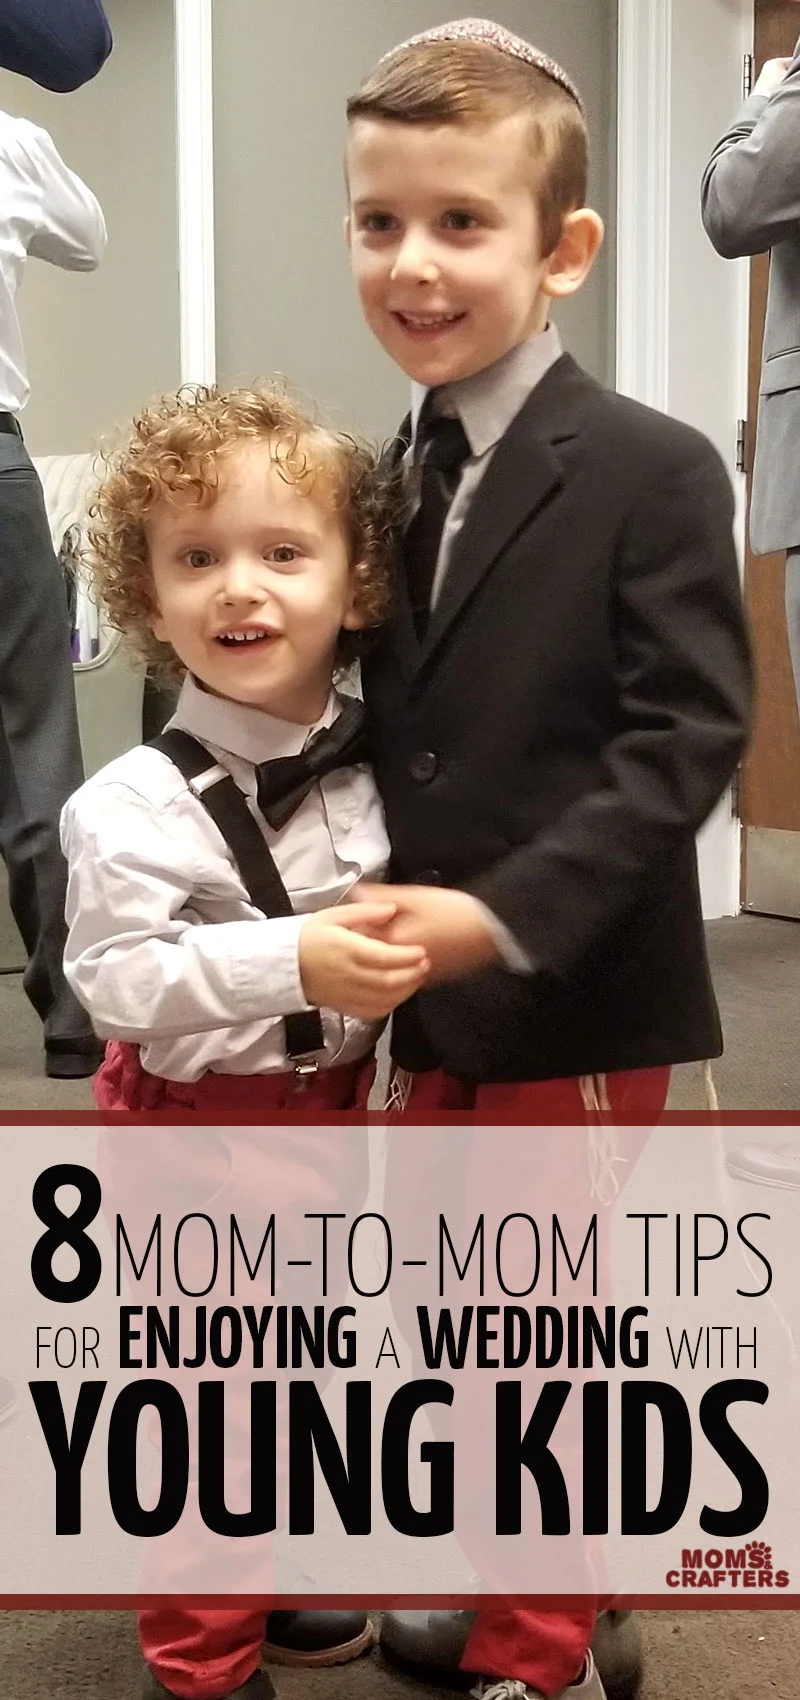 If you're bringing kids to a wedding, you'll want to read these parenting tips for kids at a wedding - it'll make the day go so much smoother!